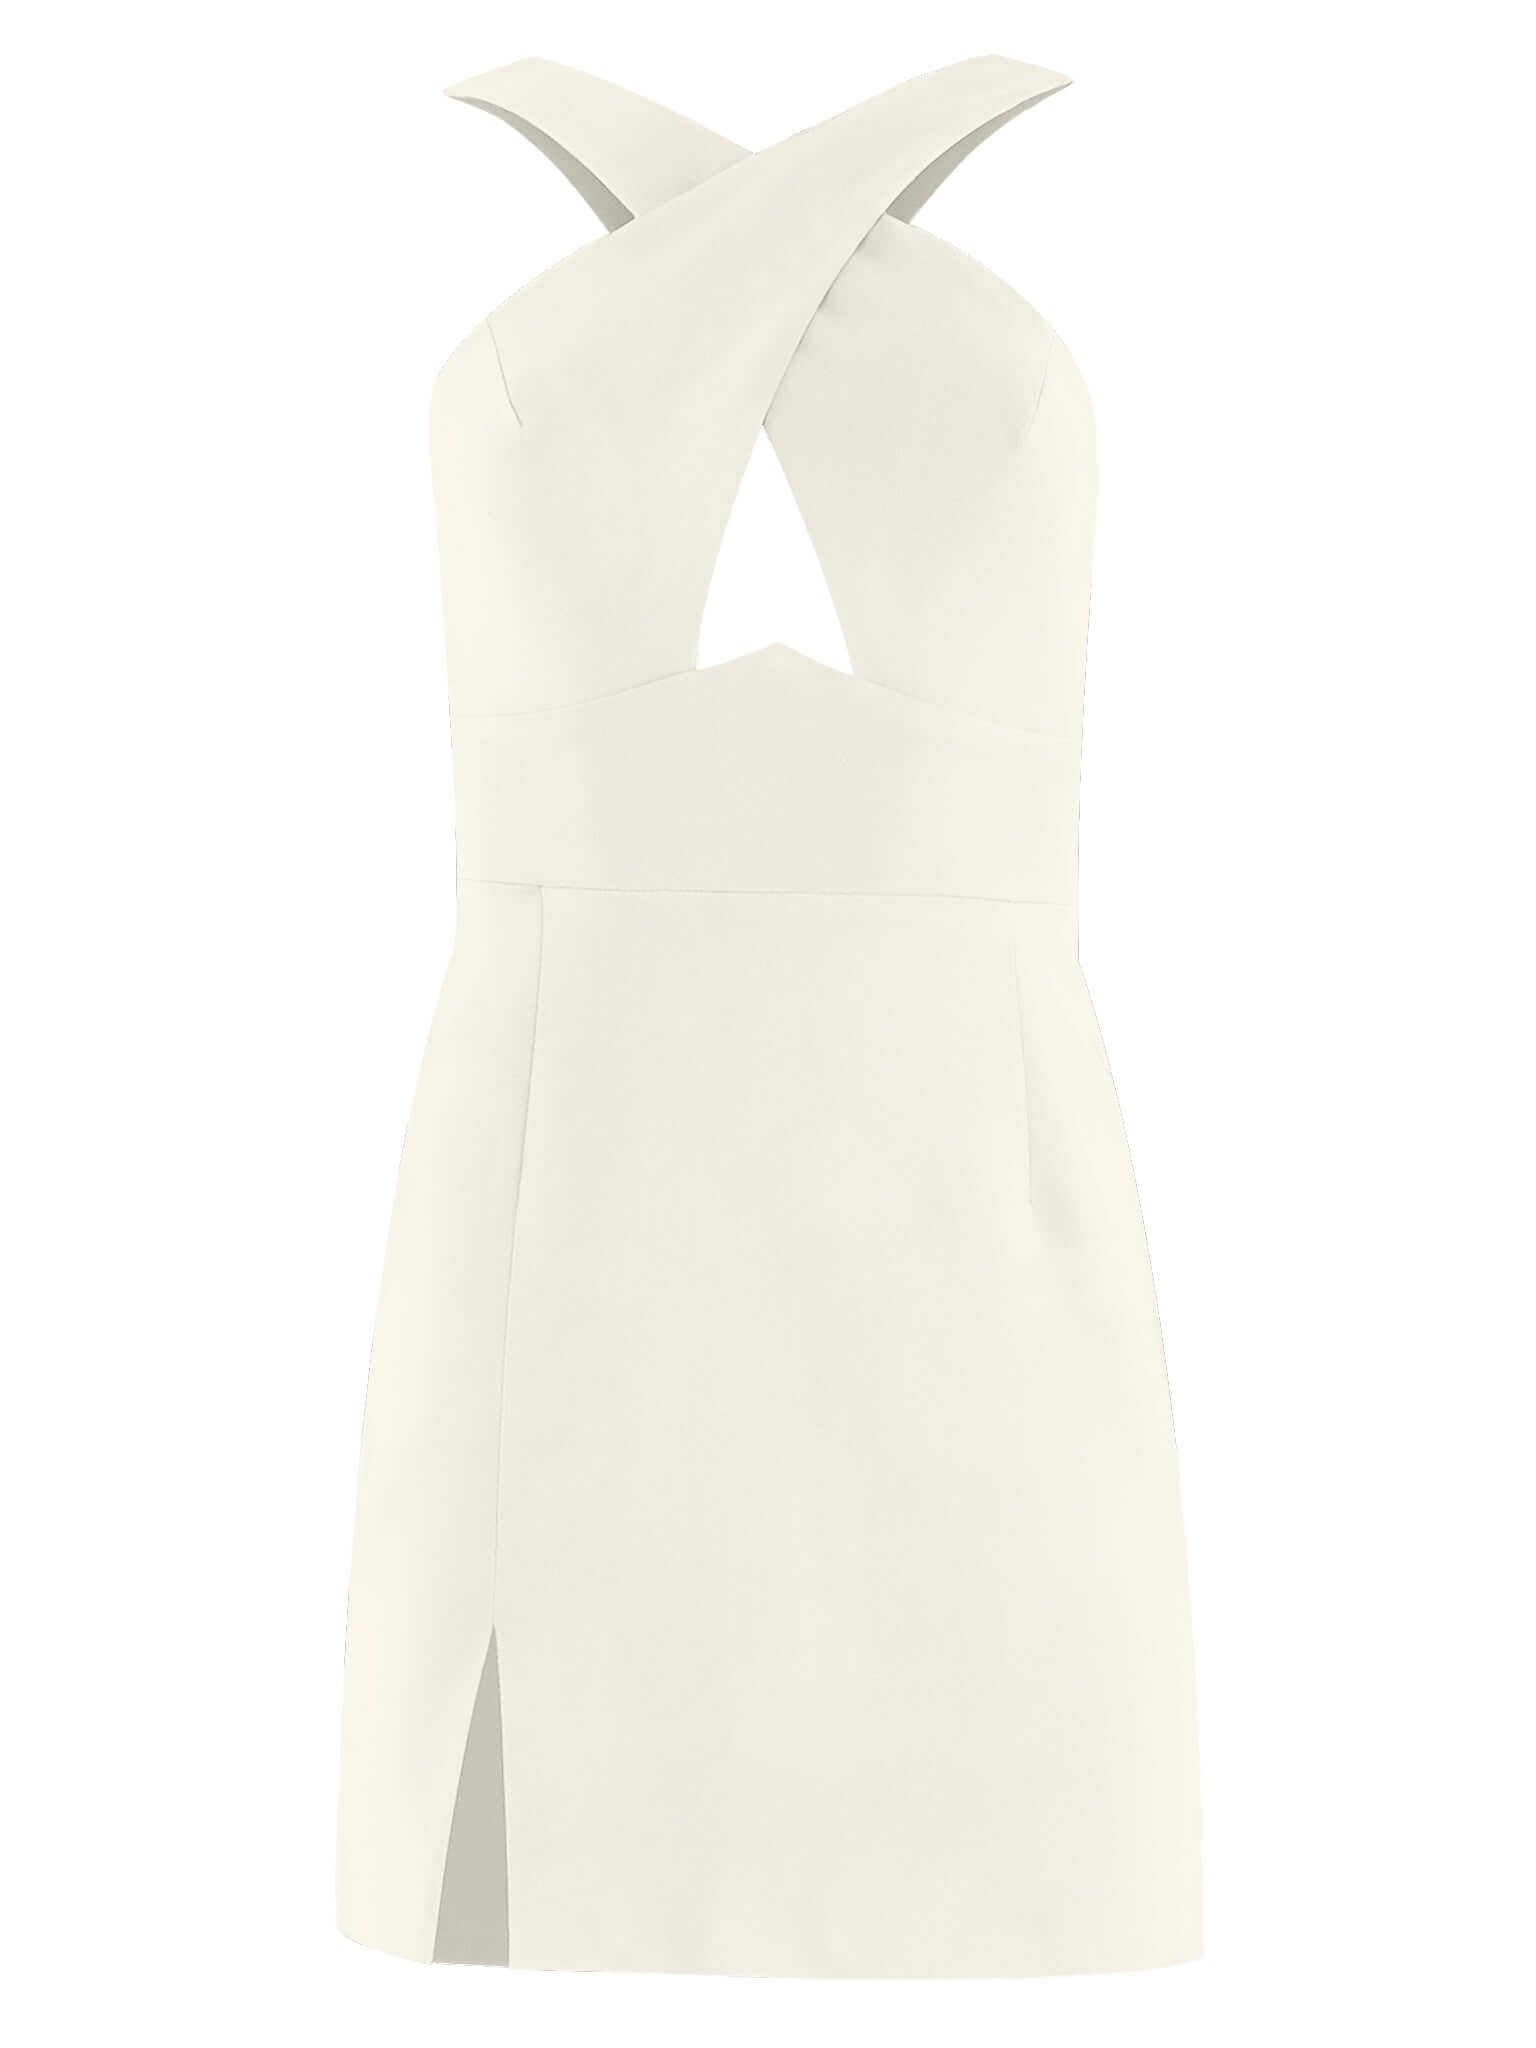 Tia Dorraine Burning Desire Cross-Neck Cut Out Mini Dress - White This mini dress arrives with a cross-neck design and a deconstructed aesthetic thanks to the sexy cut-out waist detail. The dress also includes a playful front slit detail and is fully line